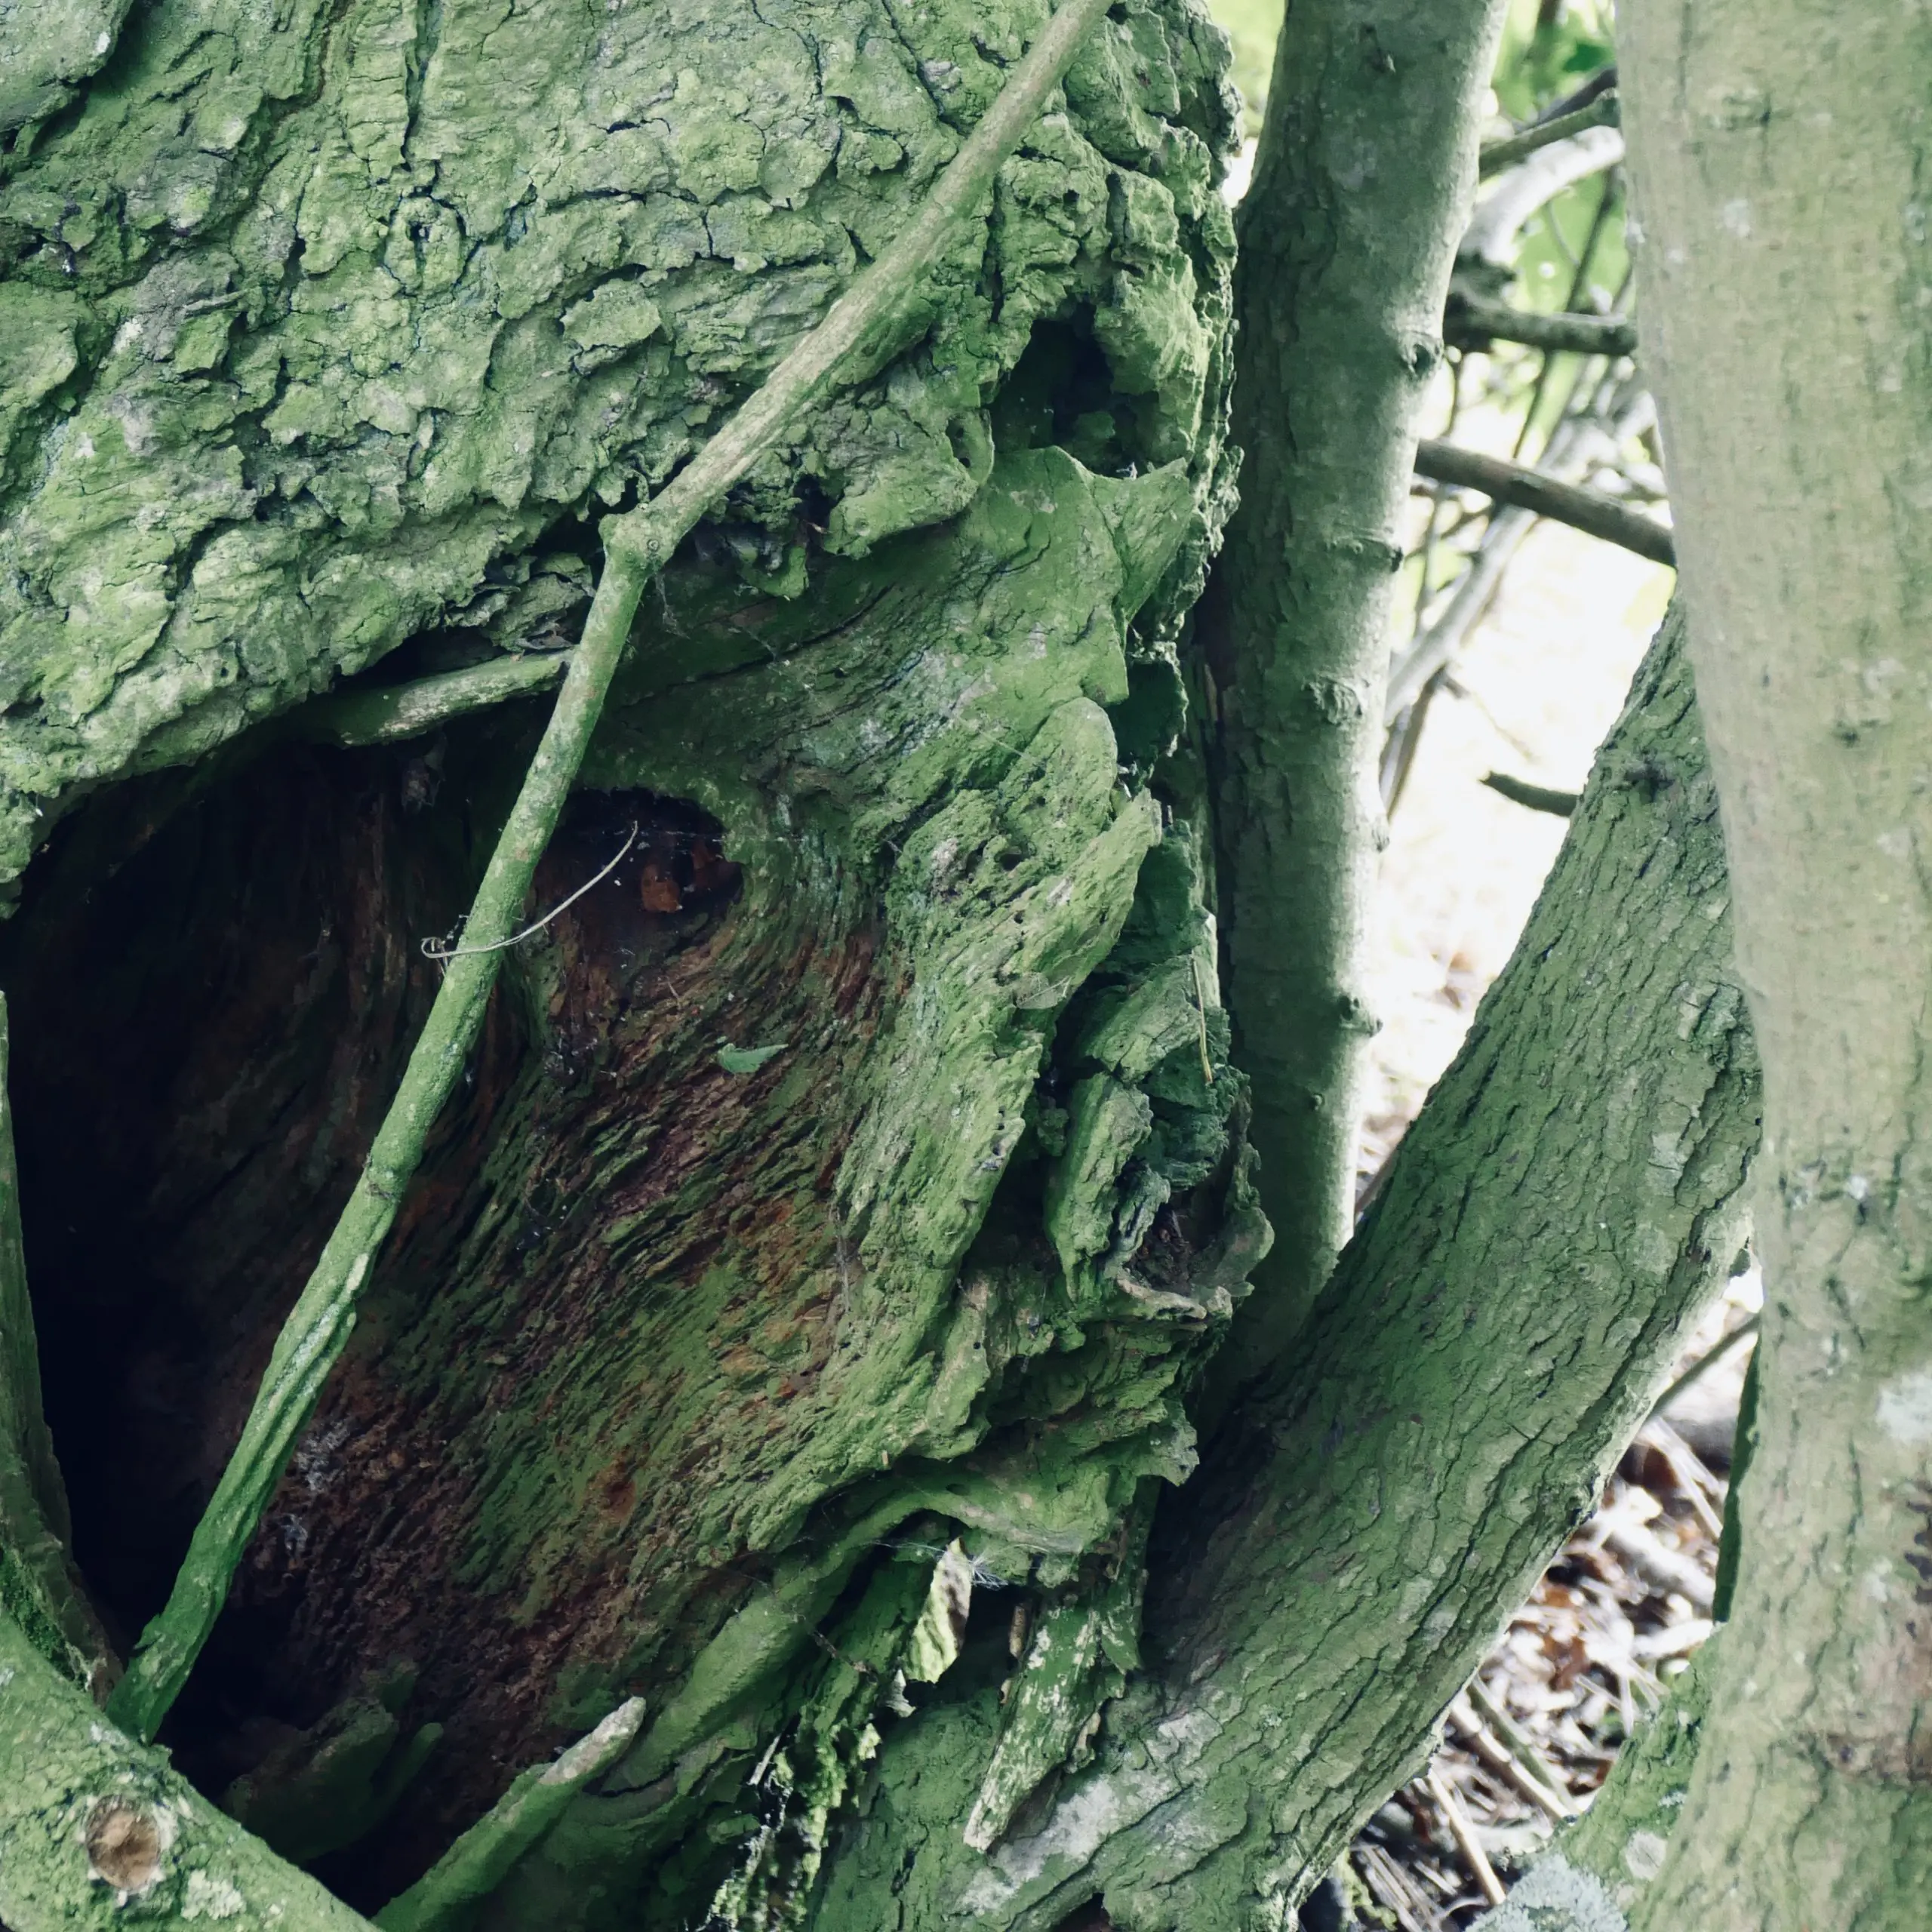 Face in a tree